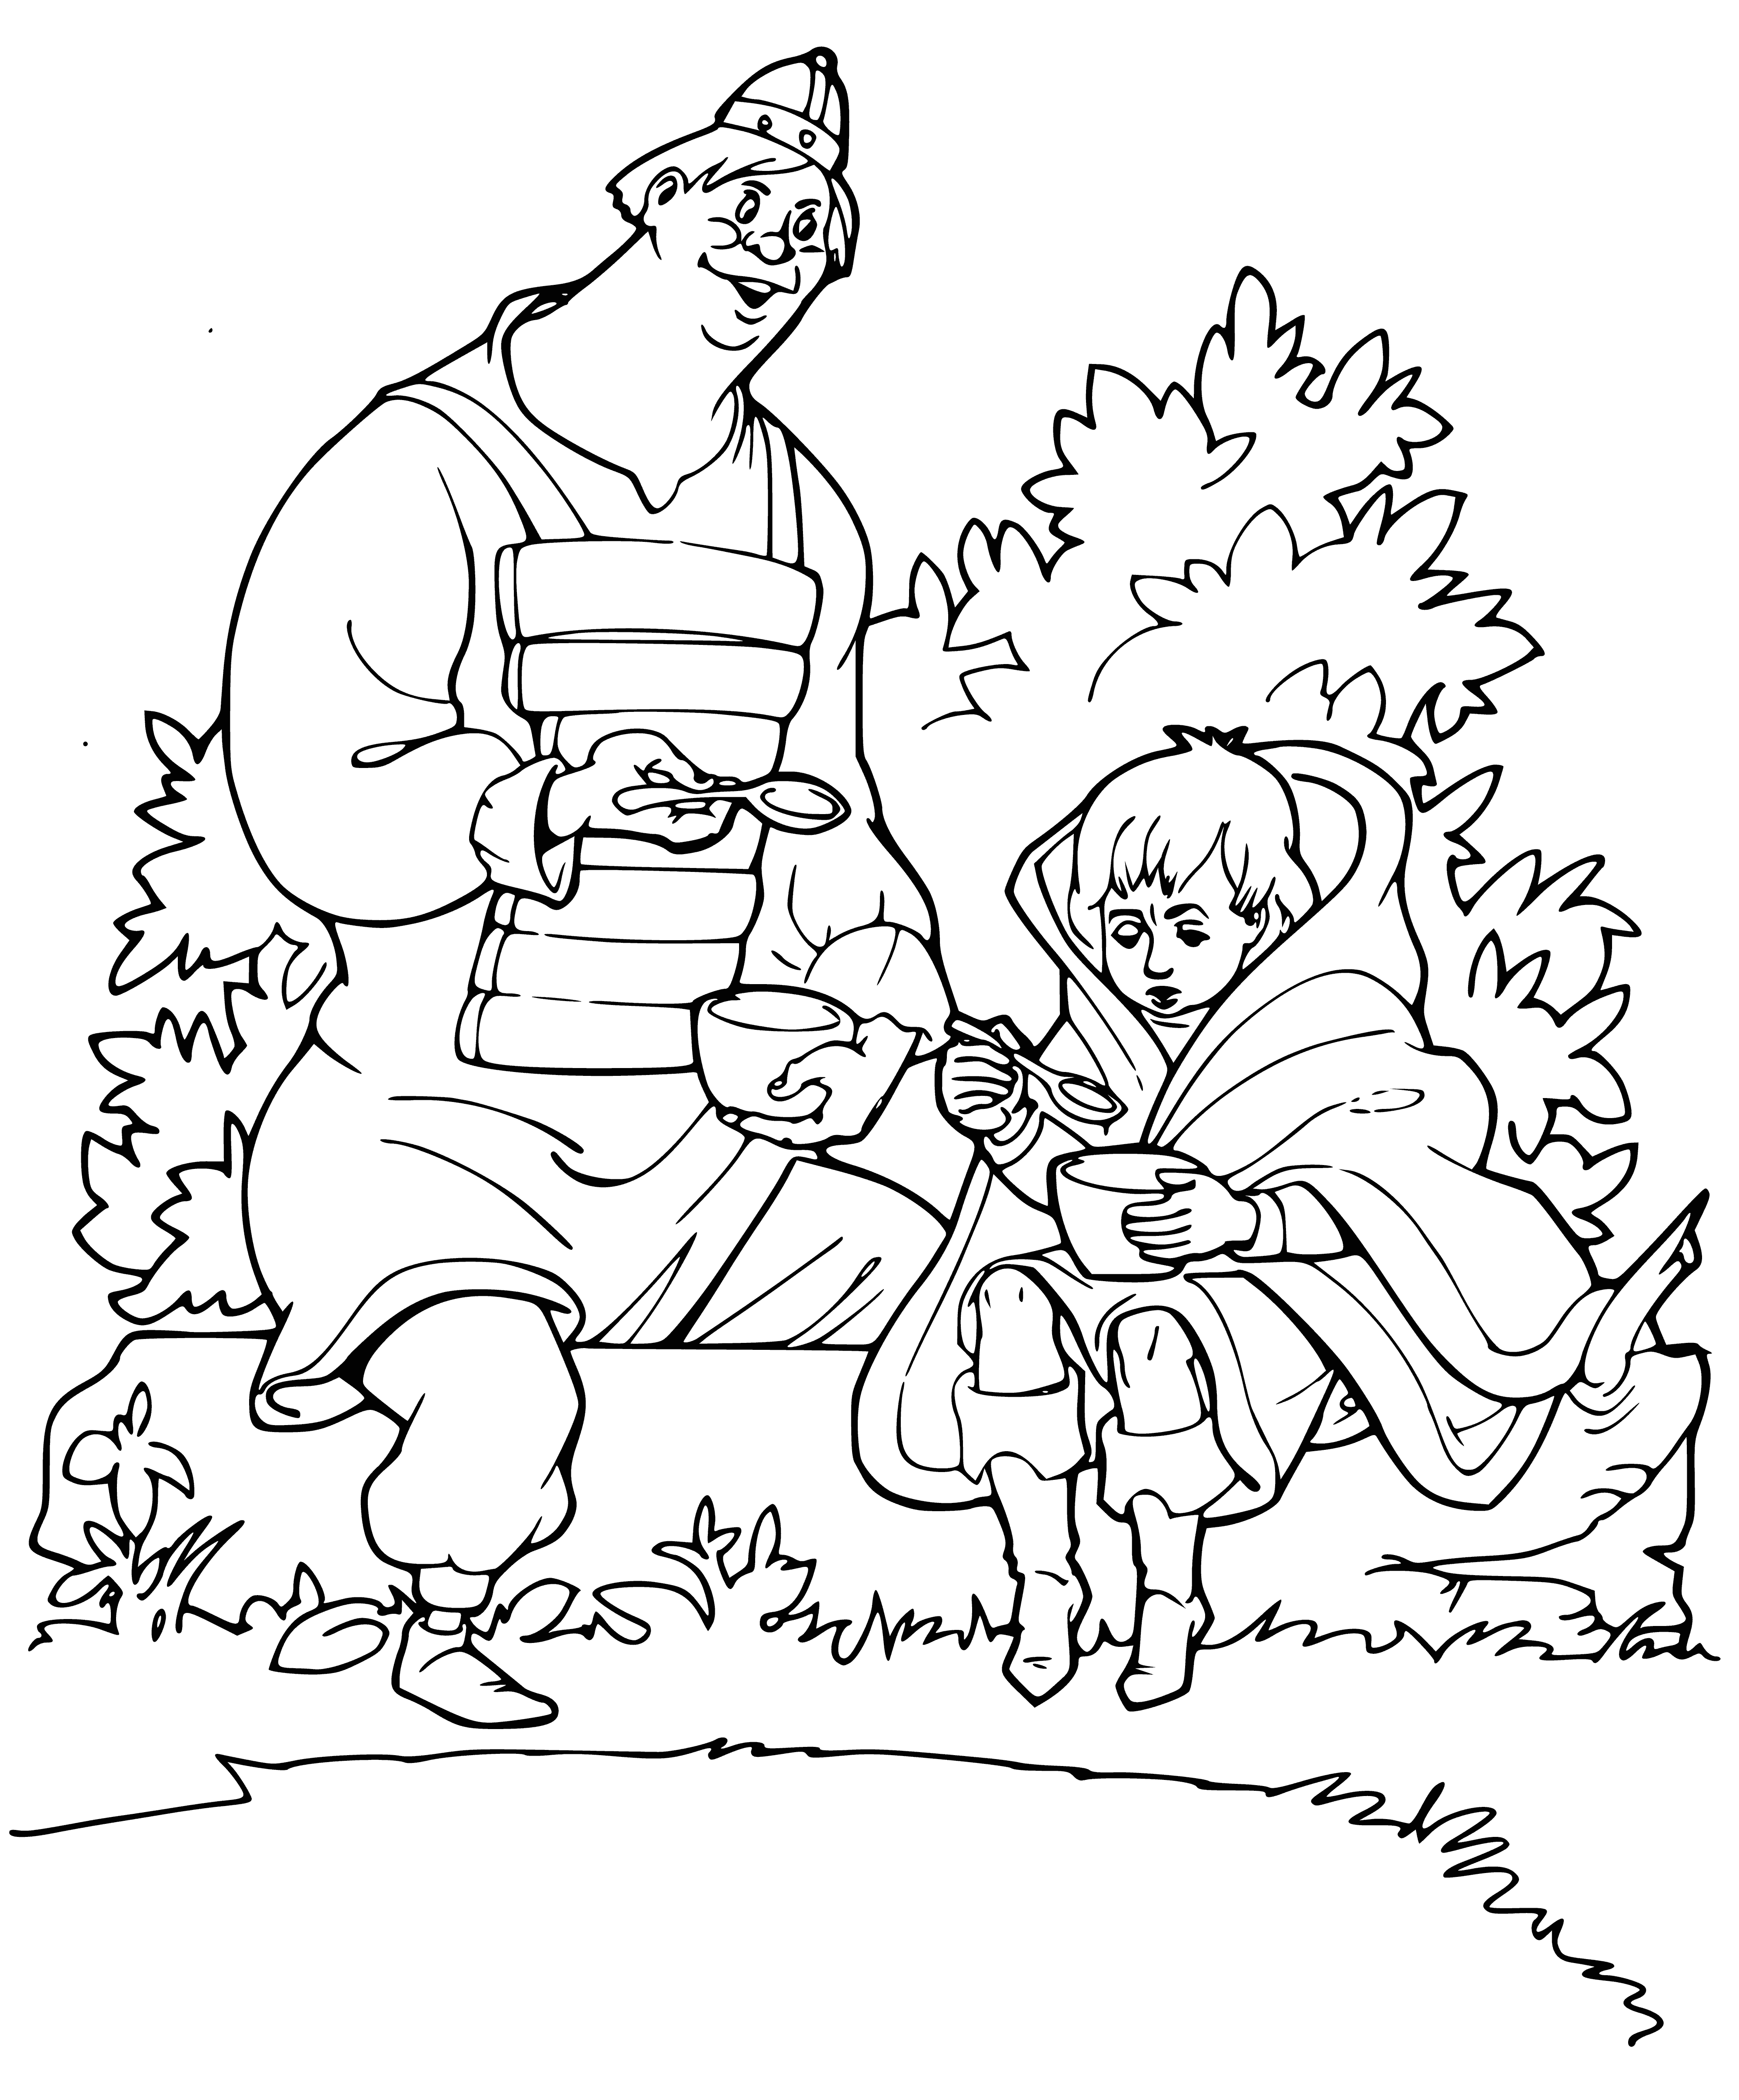 coloring page: Prince Vladimir, in traditional Russian clothing, feeds young Aleksha from a spoon. #Russia #imperialtimes